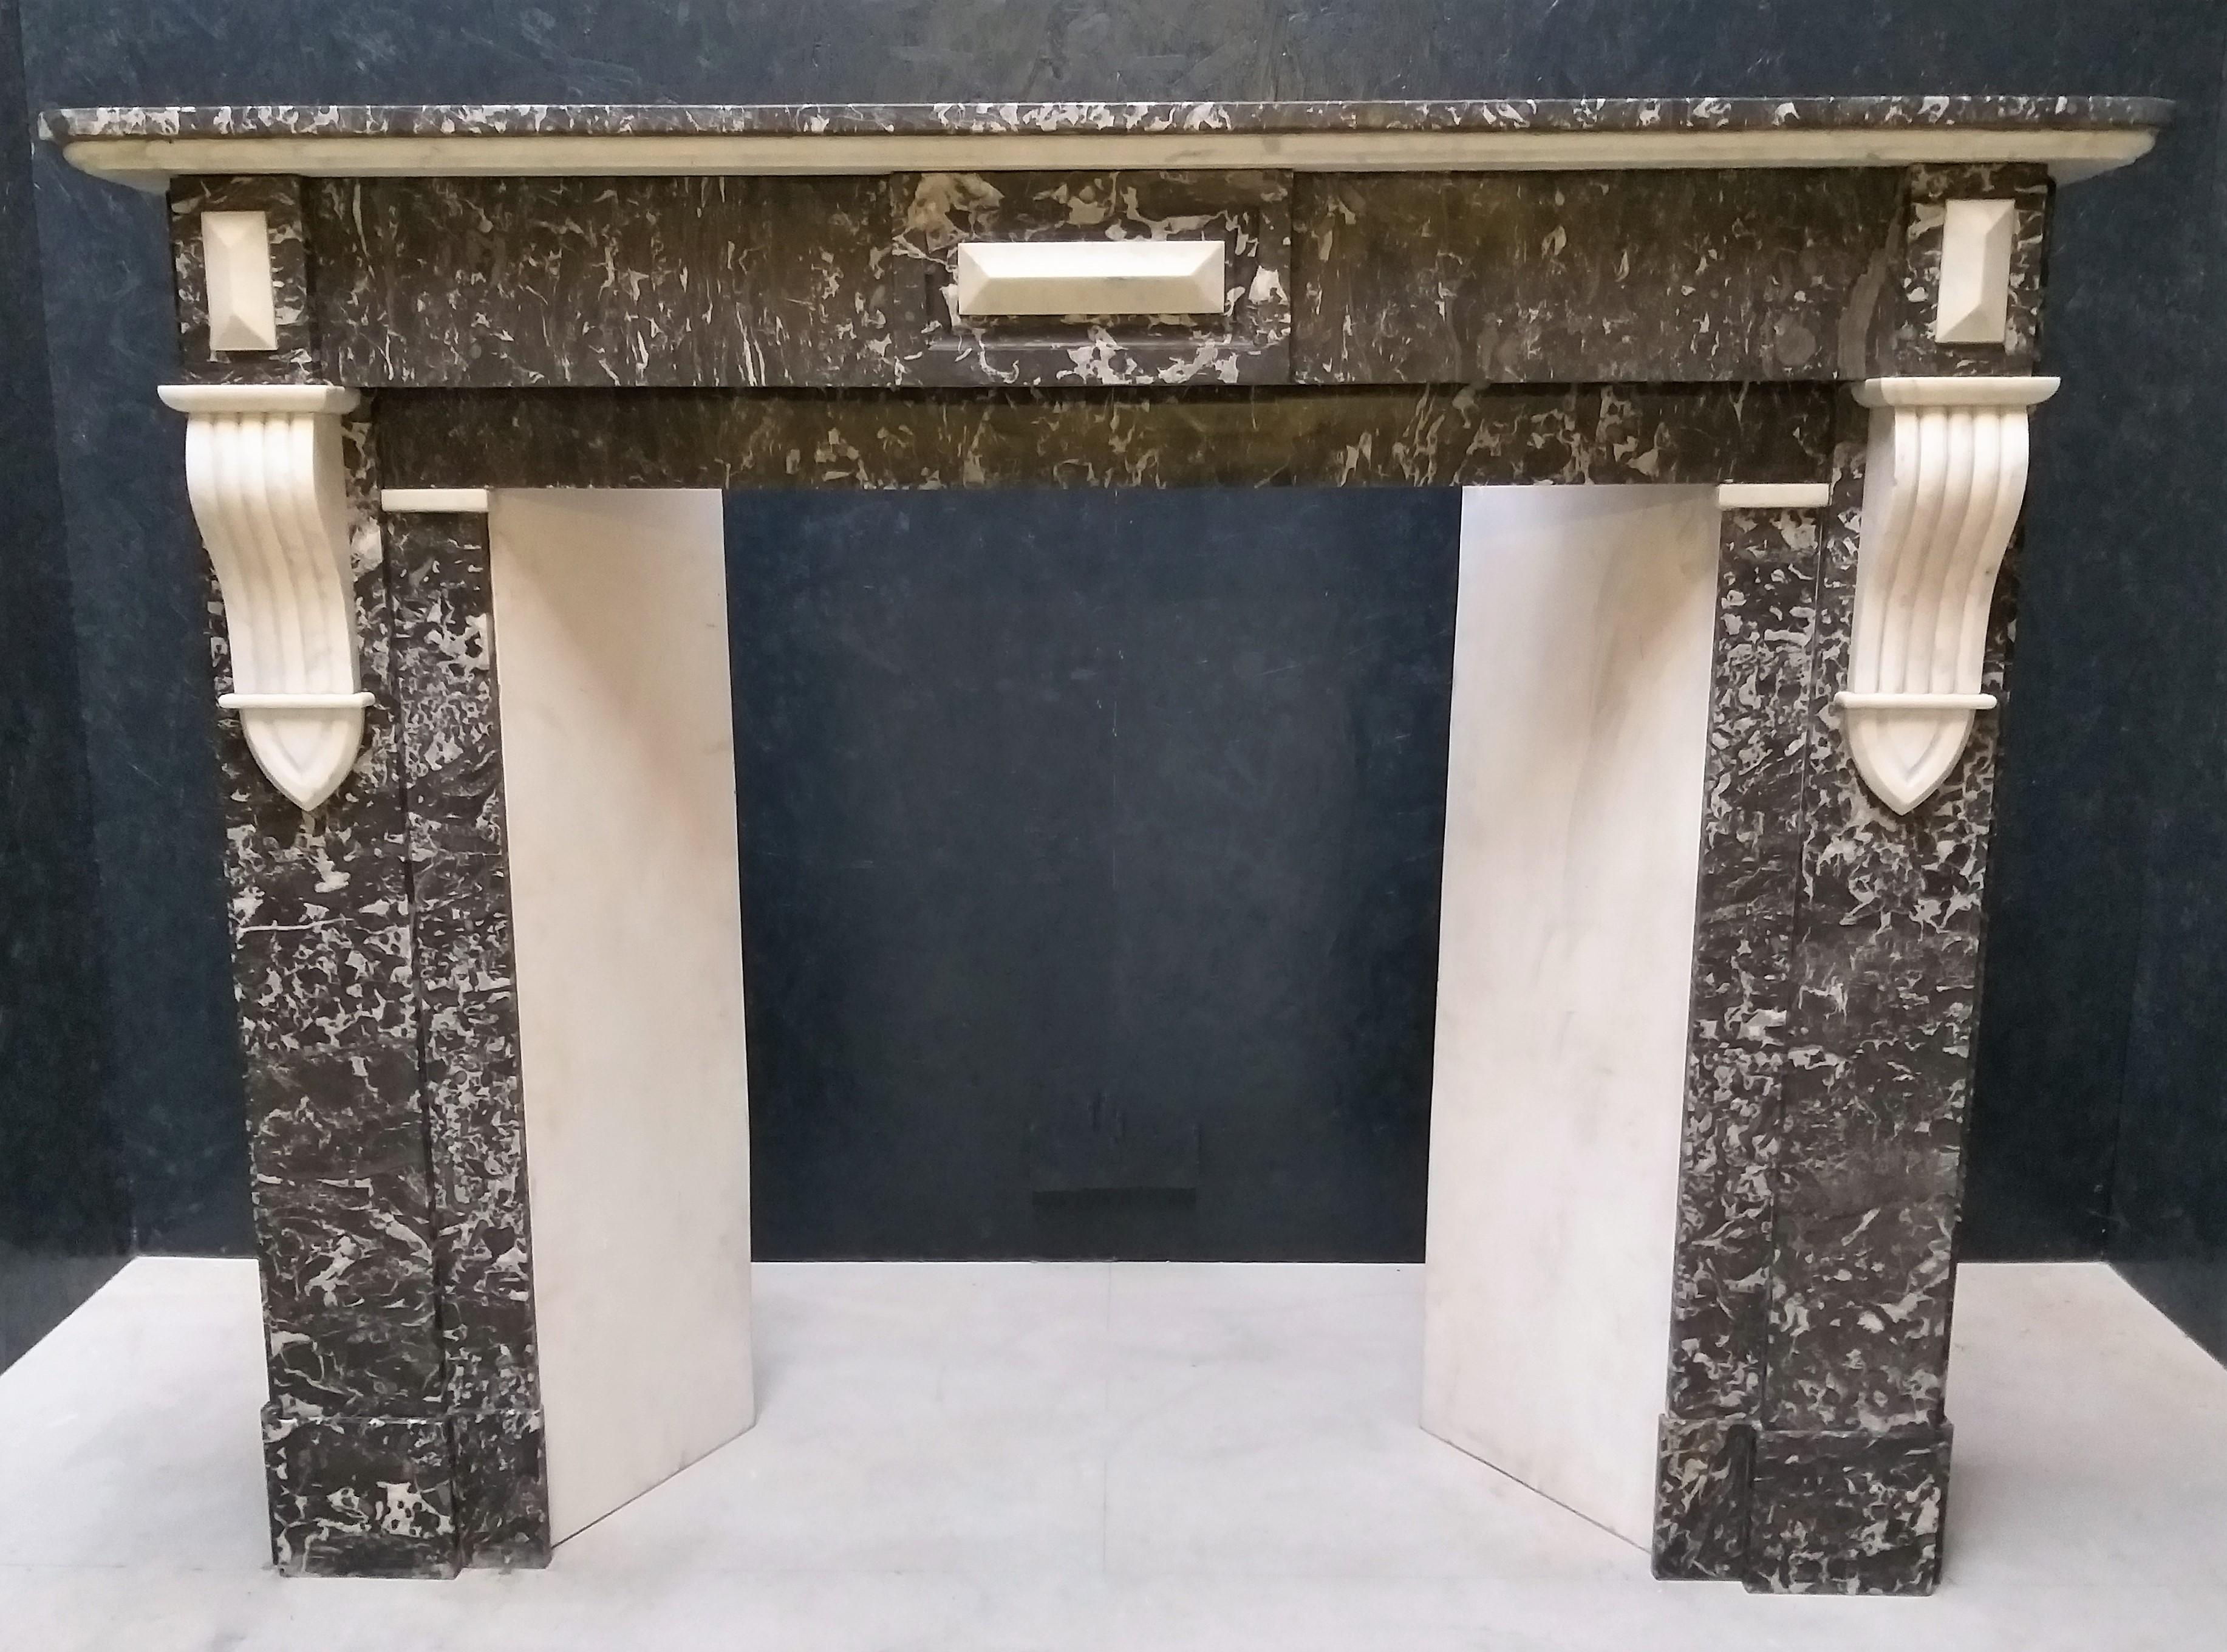 This classy Napoléon III fireplace was made in the late 19th century in Belgium, the country where you could find in the past, the used marble for this fireplace: Saint Anna-marble. The quarry is empty since many years. The Carrara marble is